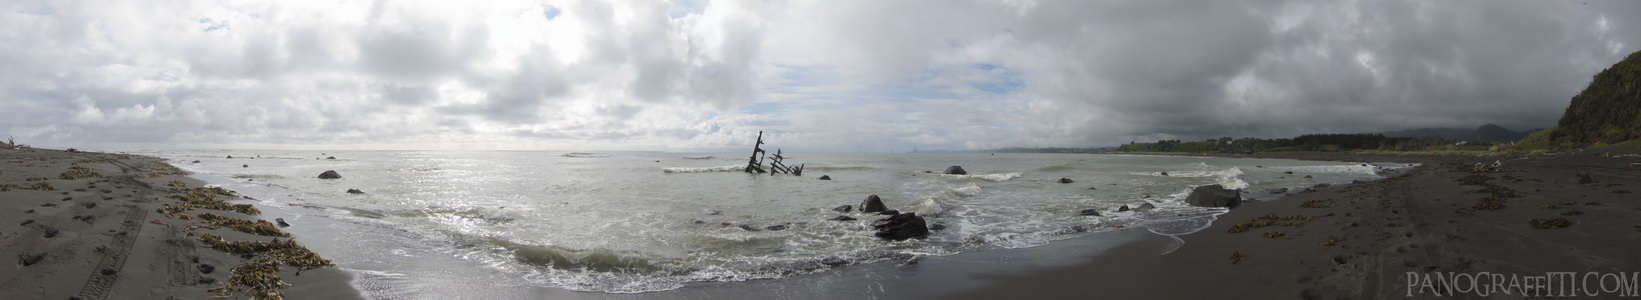 SS Gairloch Shipwreck - Just one of the many sights along the Taranaki Surf Highway